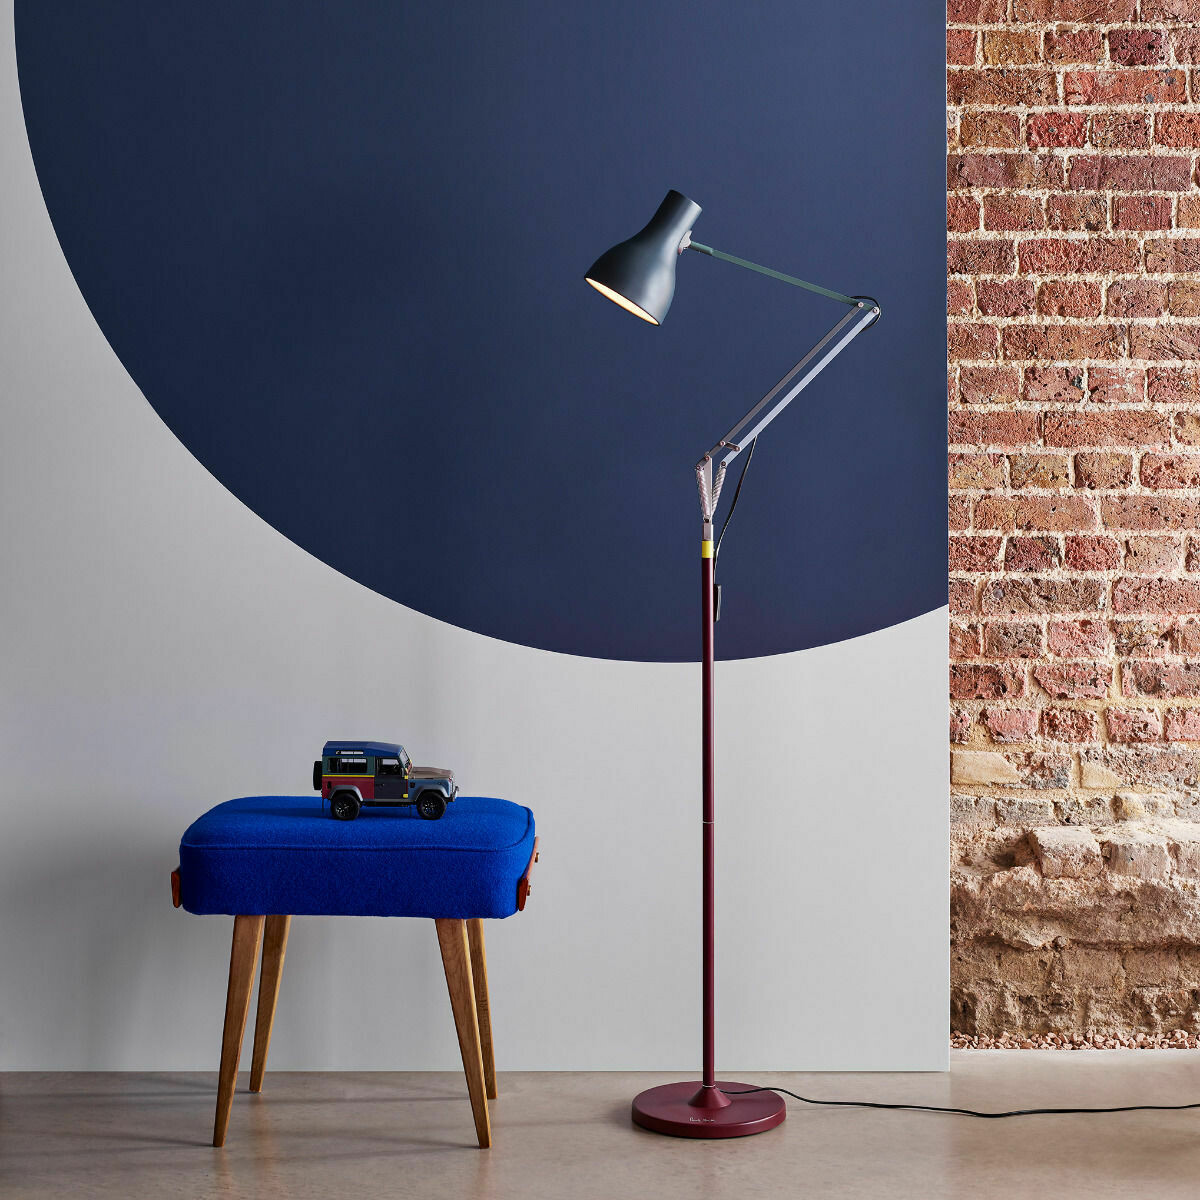 Type 75™ Paul Smith Edition Standleuchte von Anglepoise